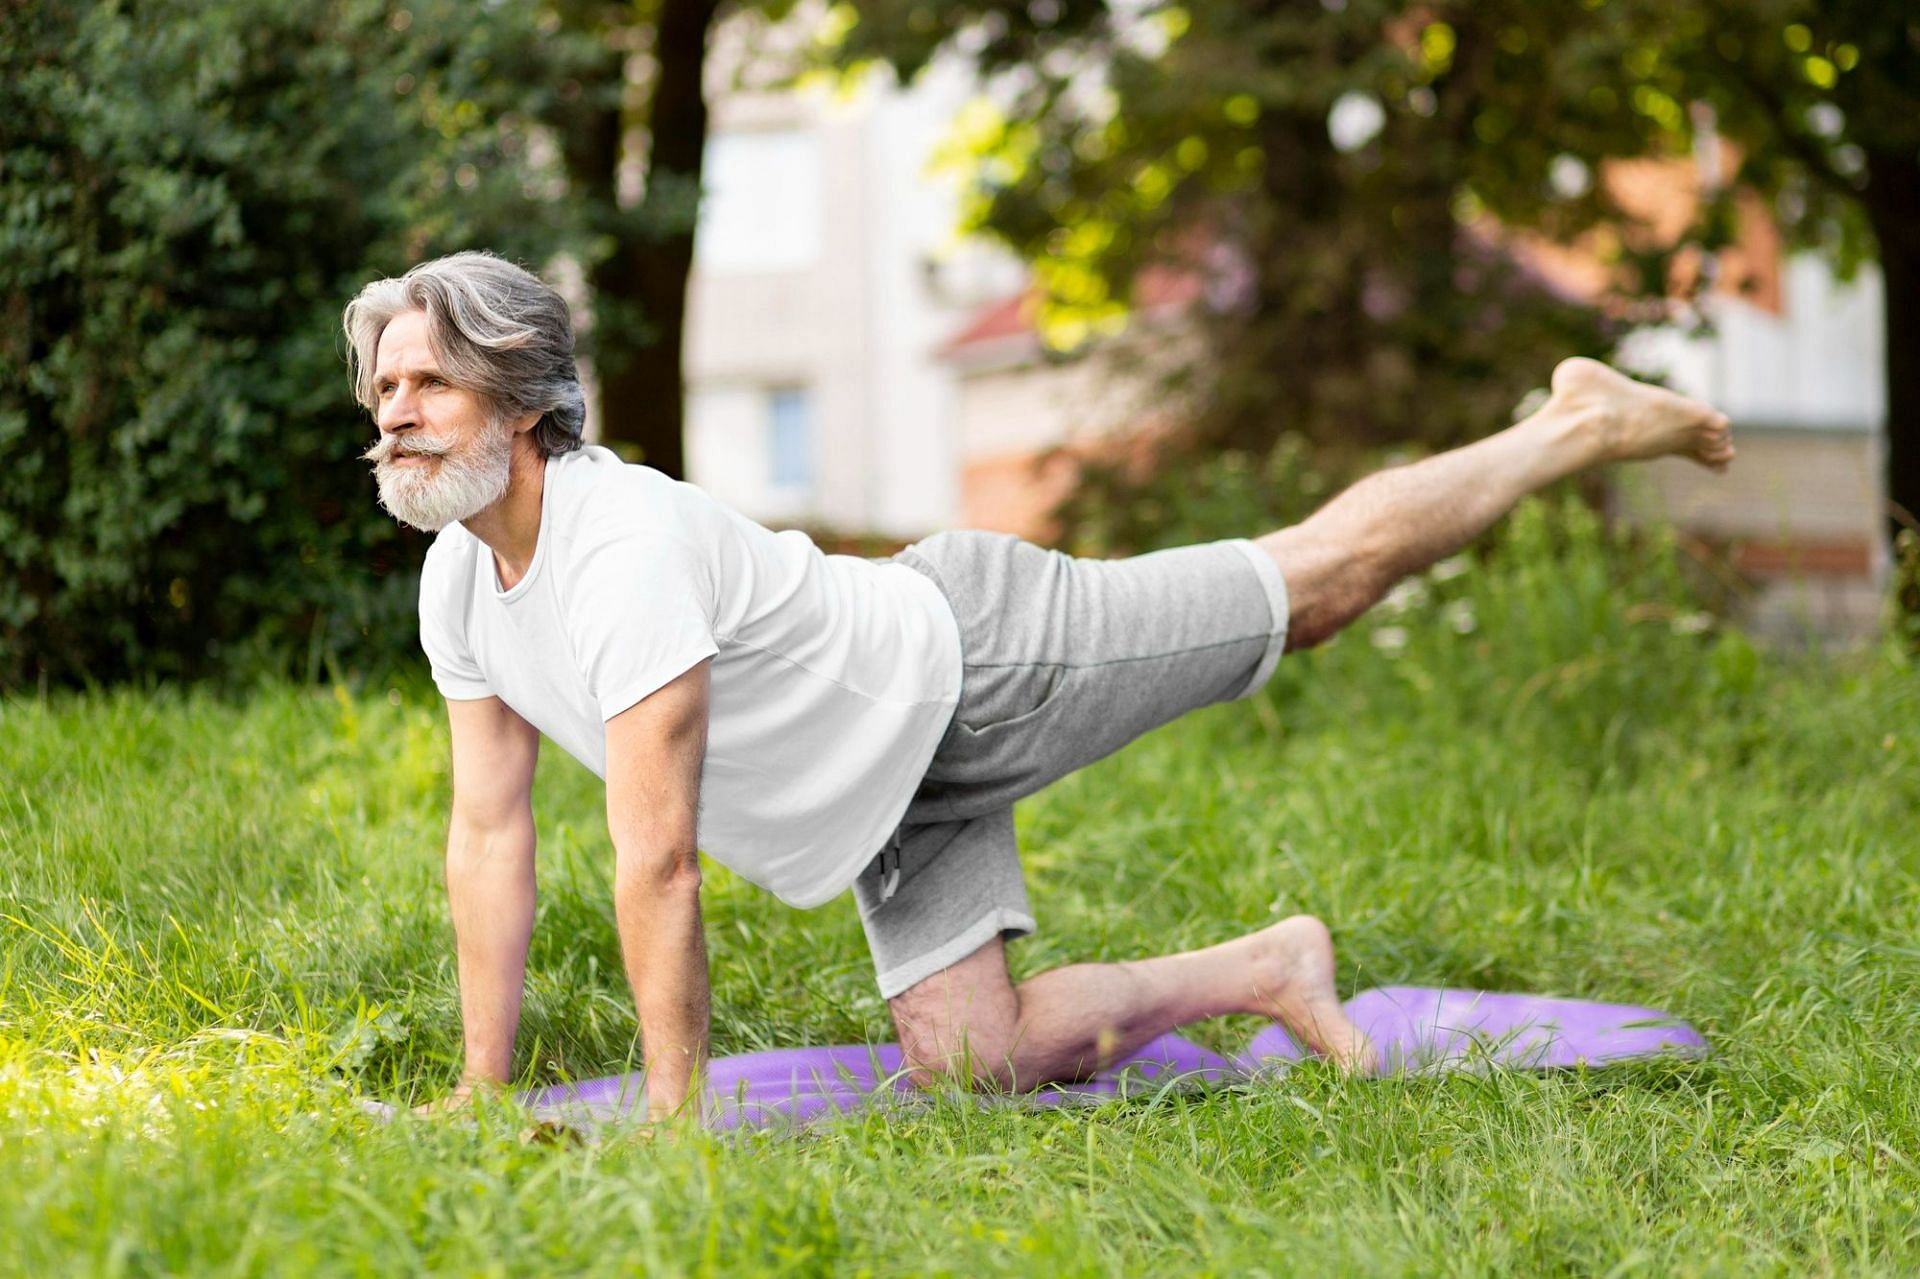 Exercise Recovery After 40 (Image by Freepik)